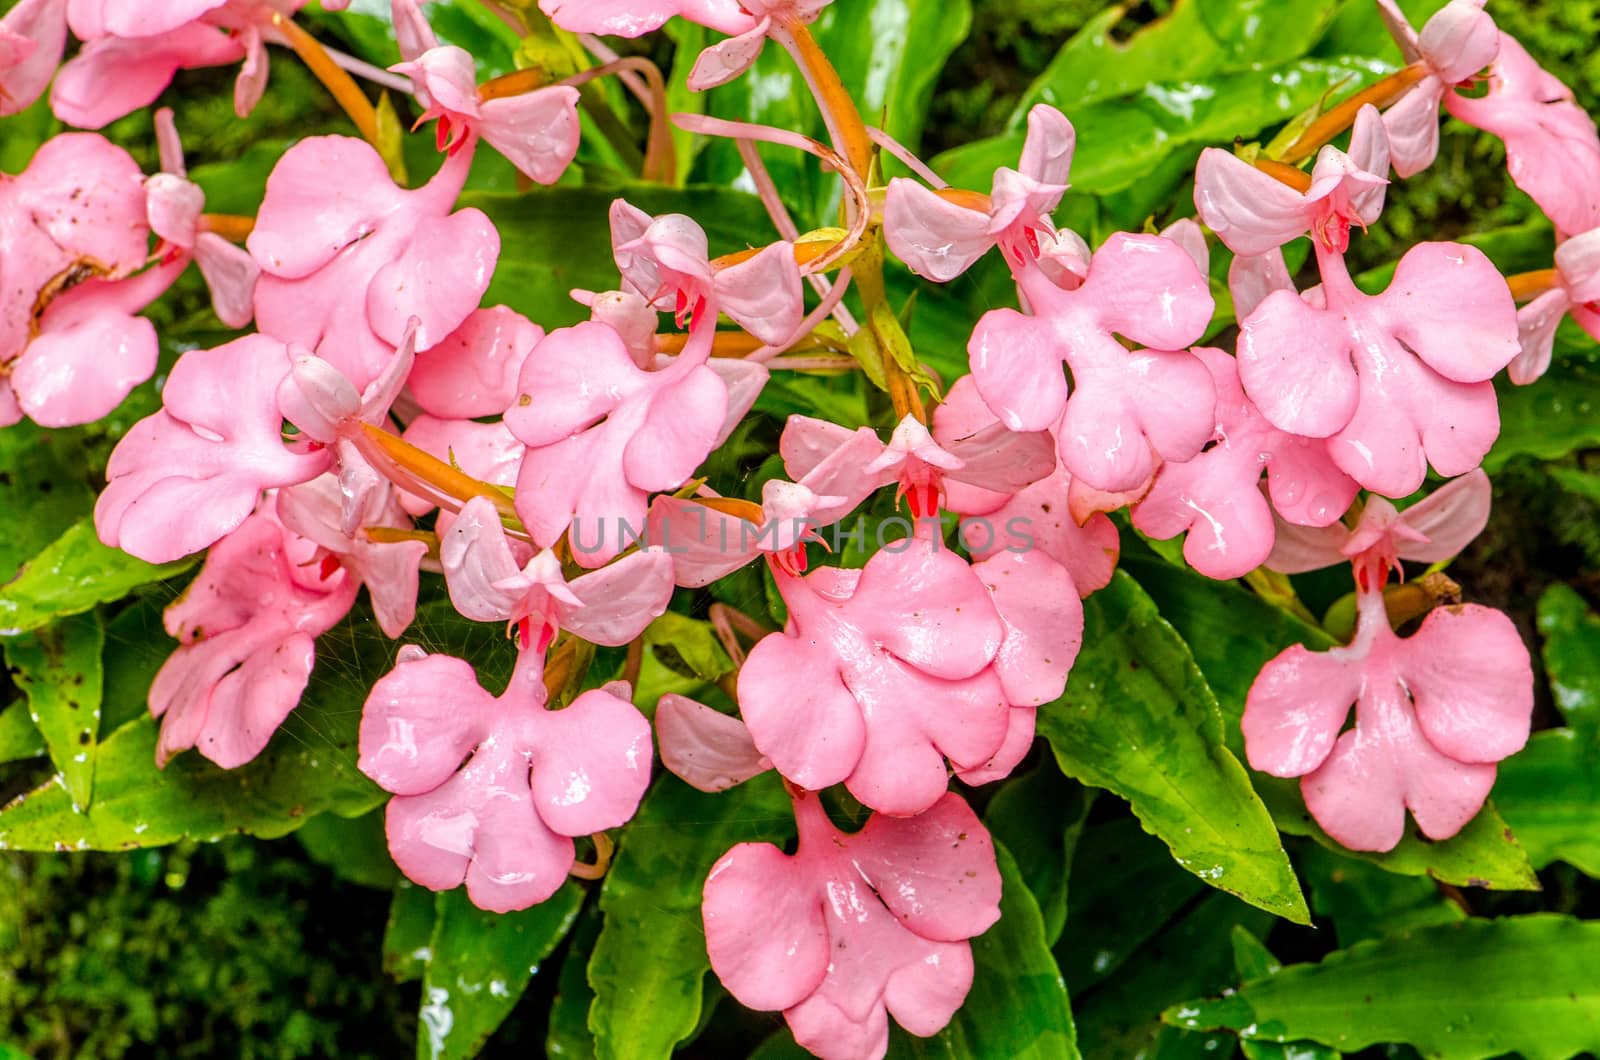 The Pink-Lipped Rhodocheila Habenaria (Pink Snap Dragon Flower)  by chanwity